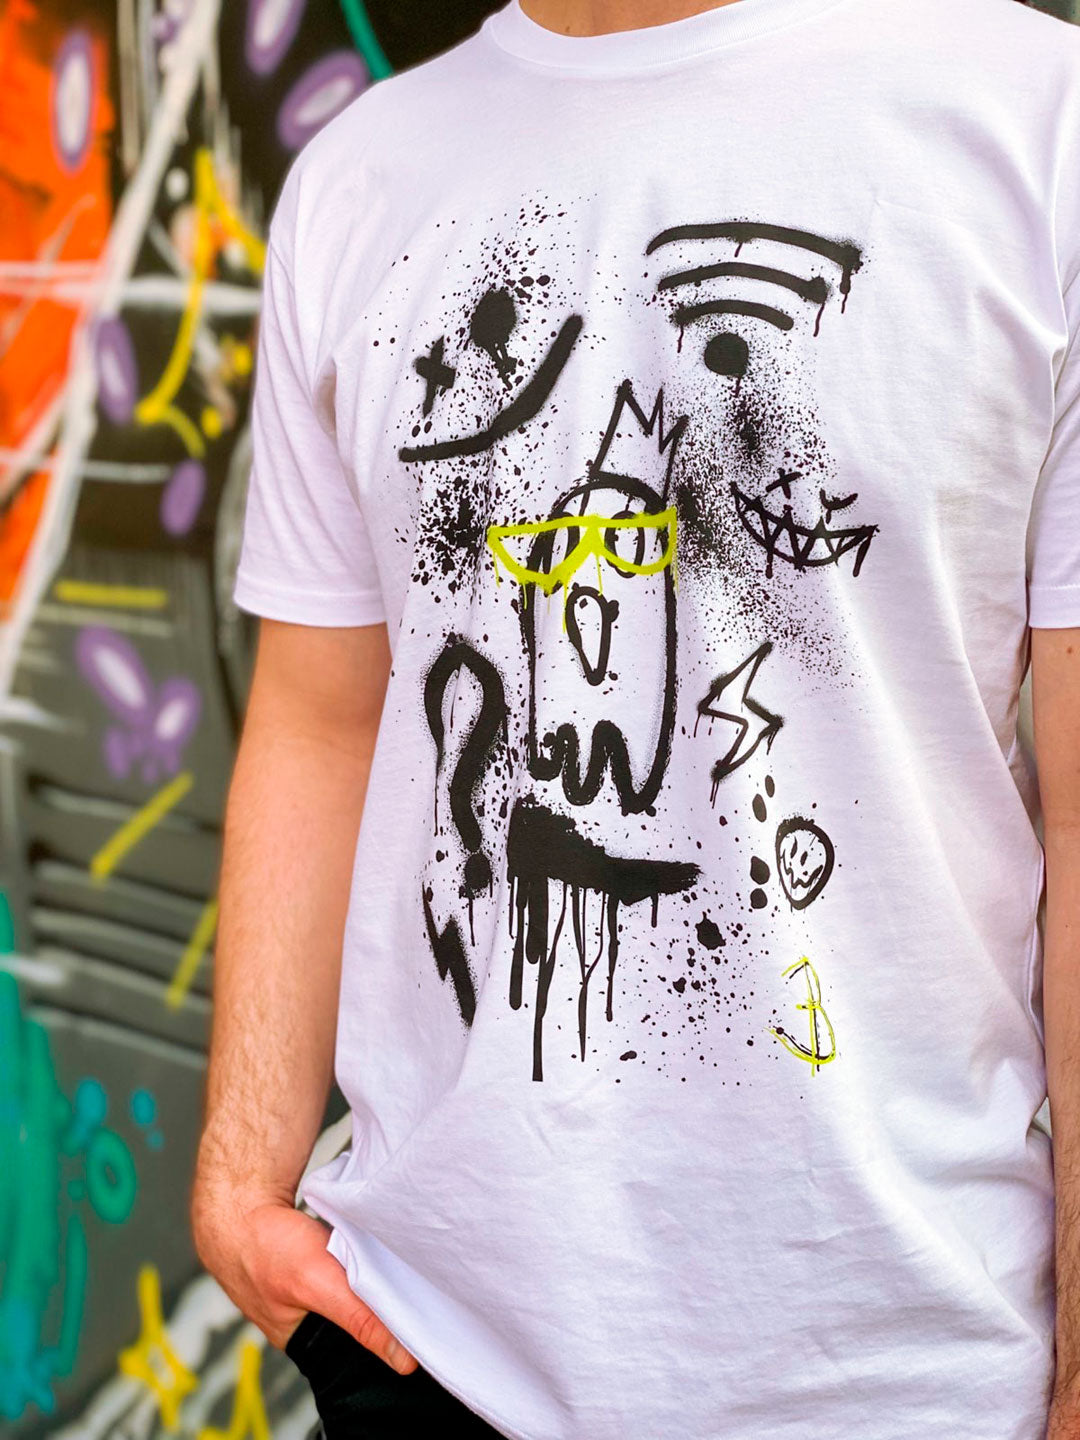 Front Design of the 'Off Grid' white mens or unisex t-shirt worn by model against a colourful background, designed by Bridget Bradley. 